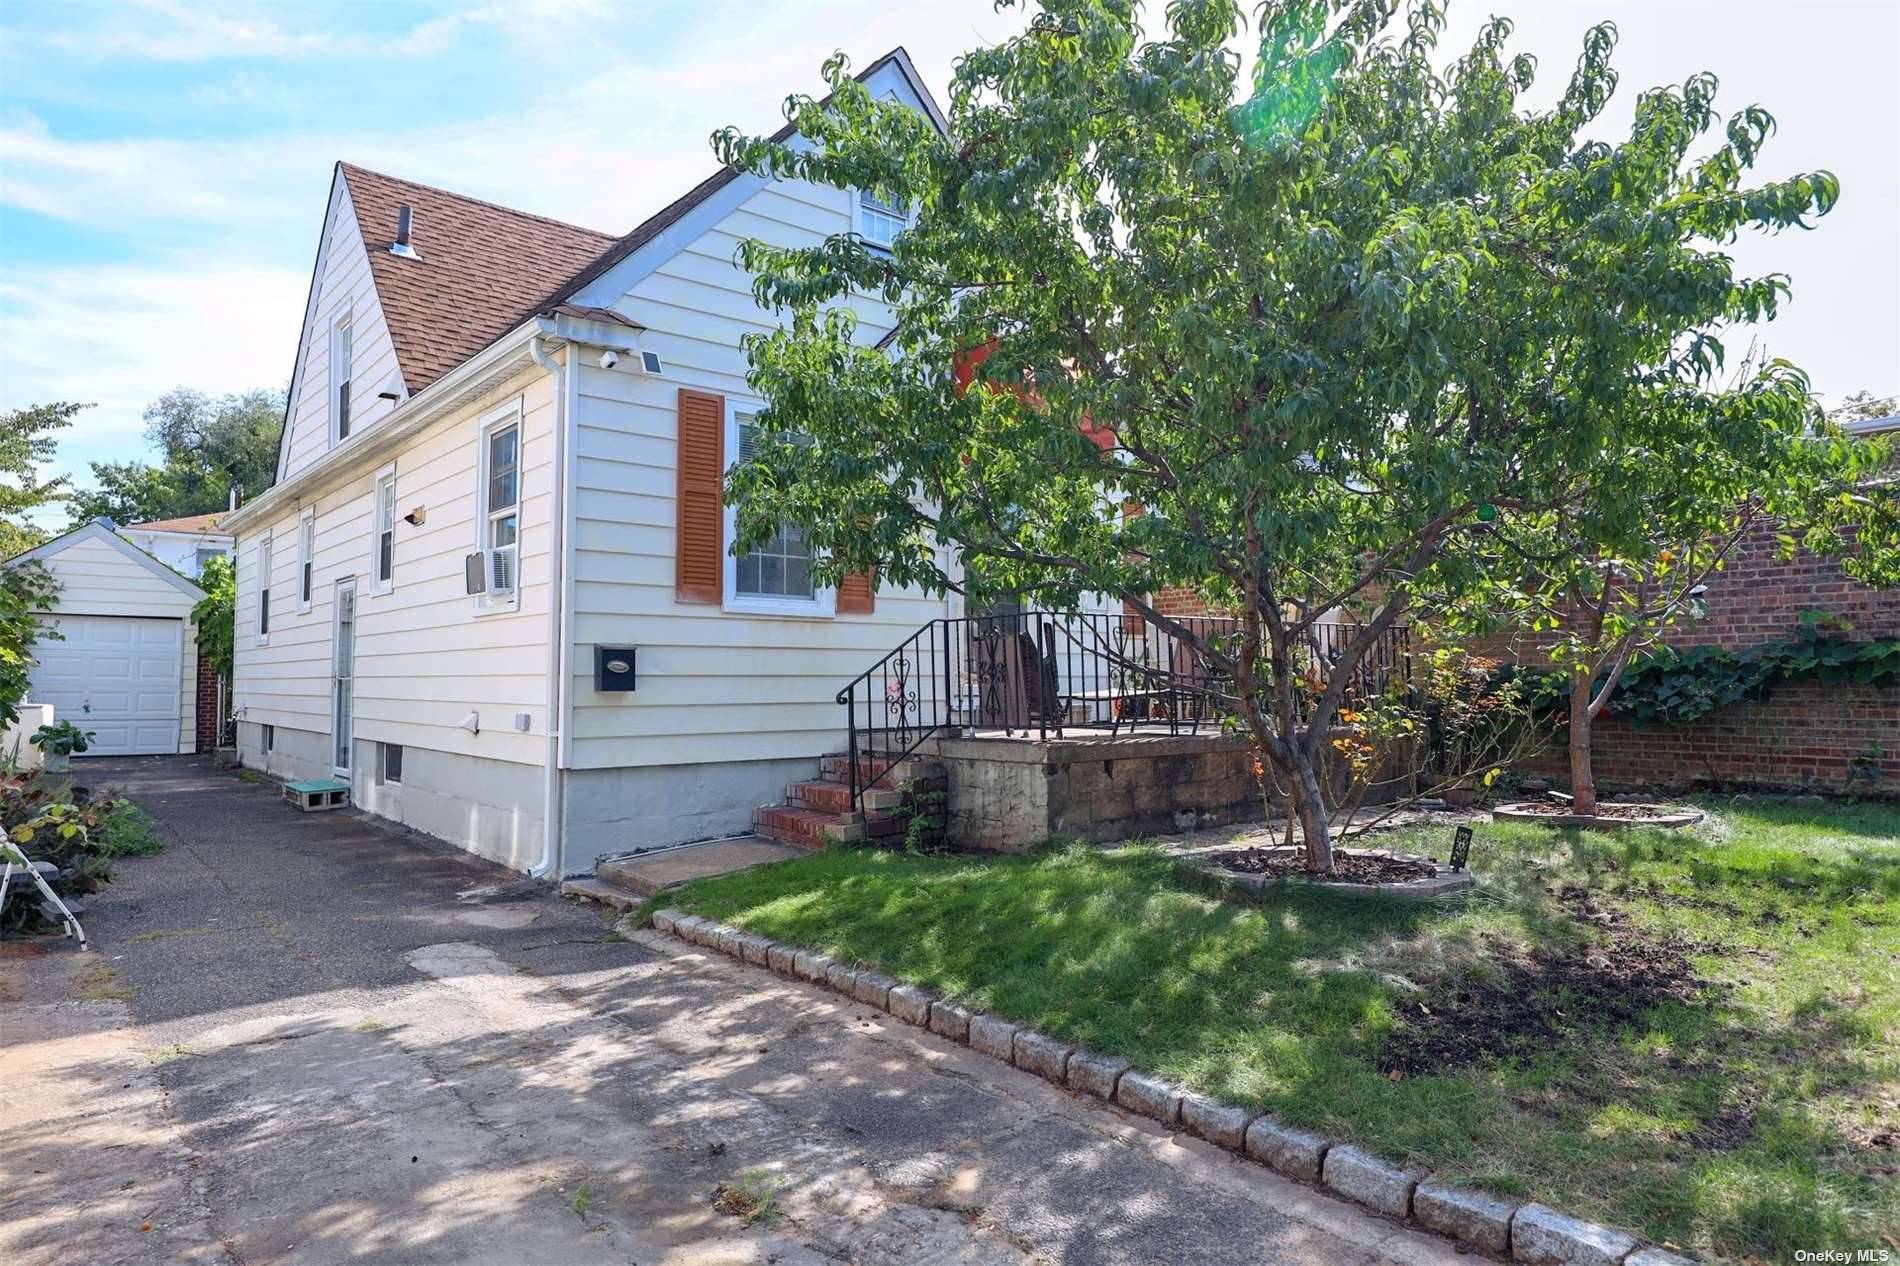 JUST LISTED CHARMING DETACHED ONE FAMILY NESTED IN A VERY CONVENIENT LOCATION.